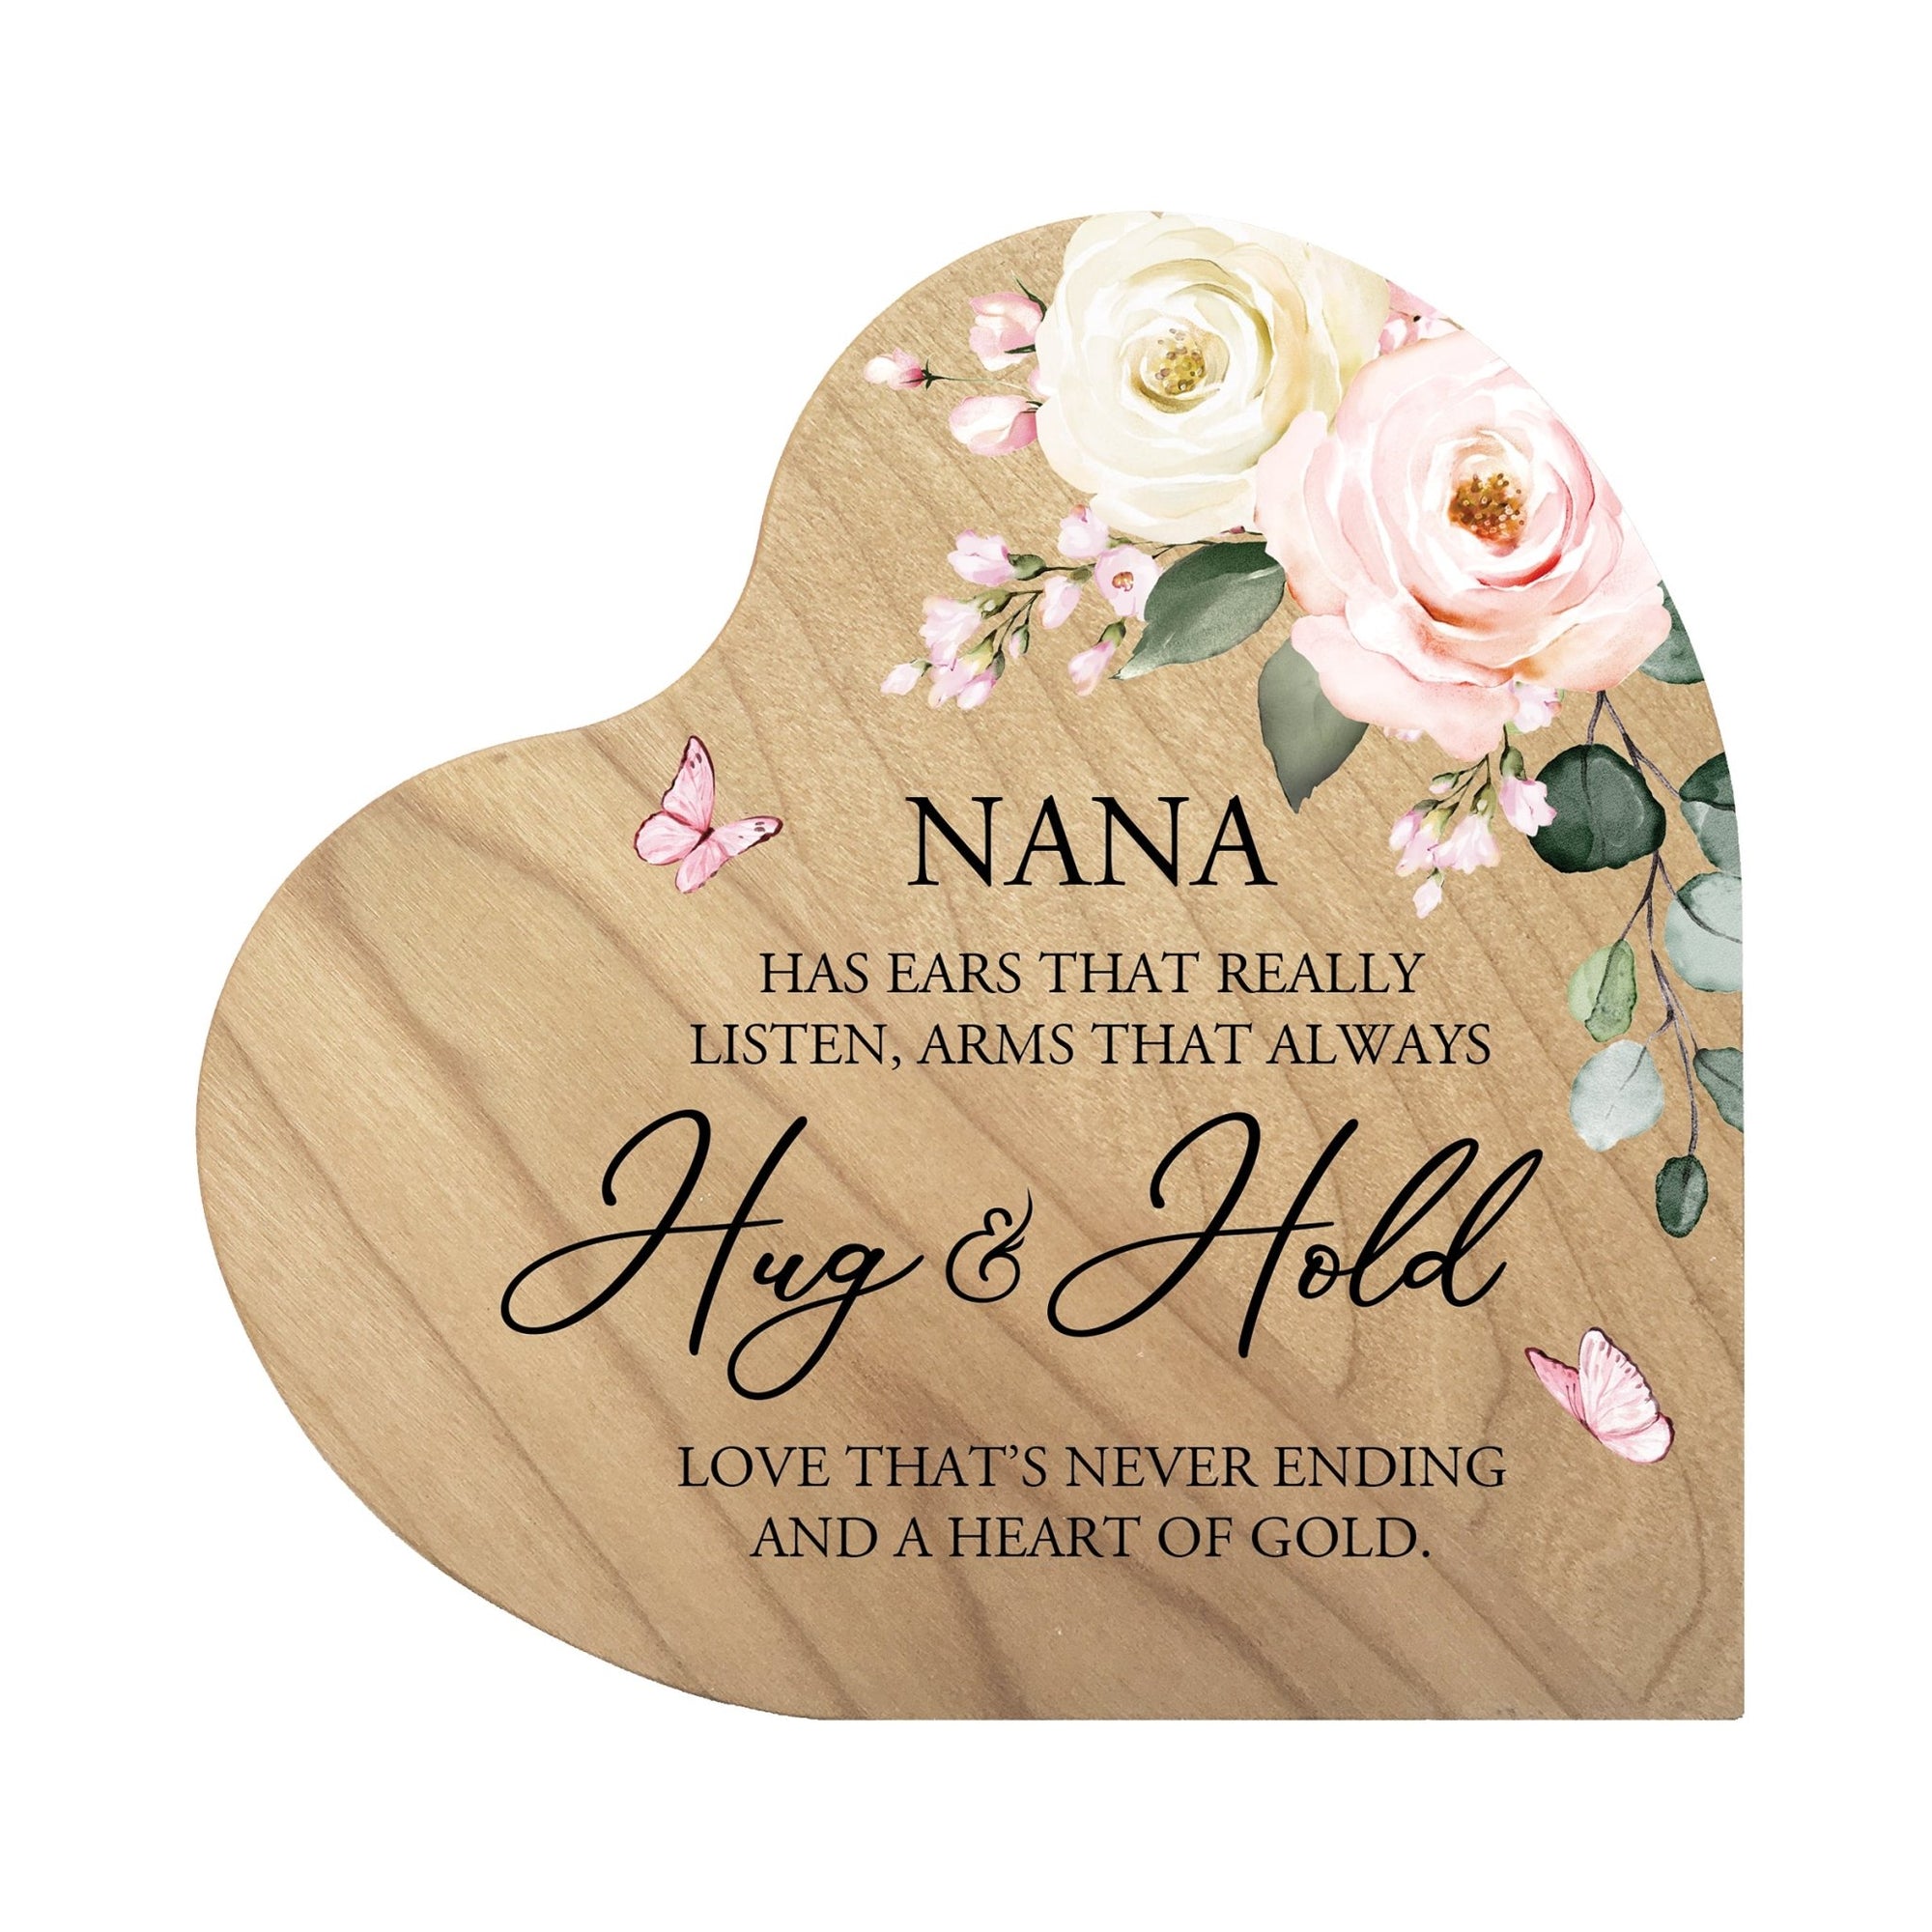 Unique Grandmother’s Love Heart Block- 5in with Inspirational verse - Nana, Hug and Hold - LifeSong Milestones